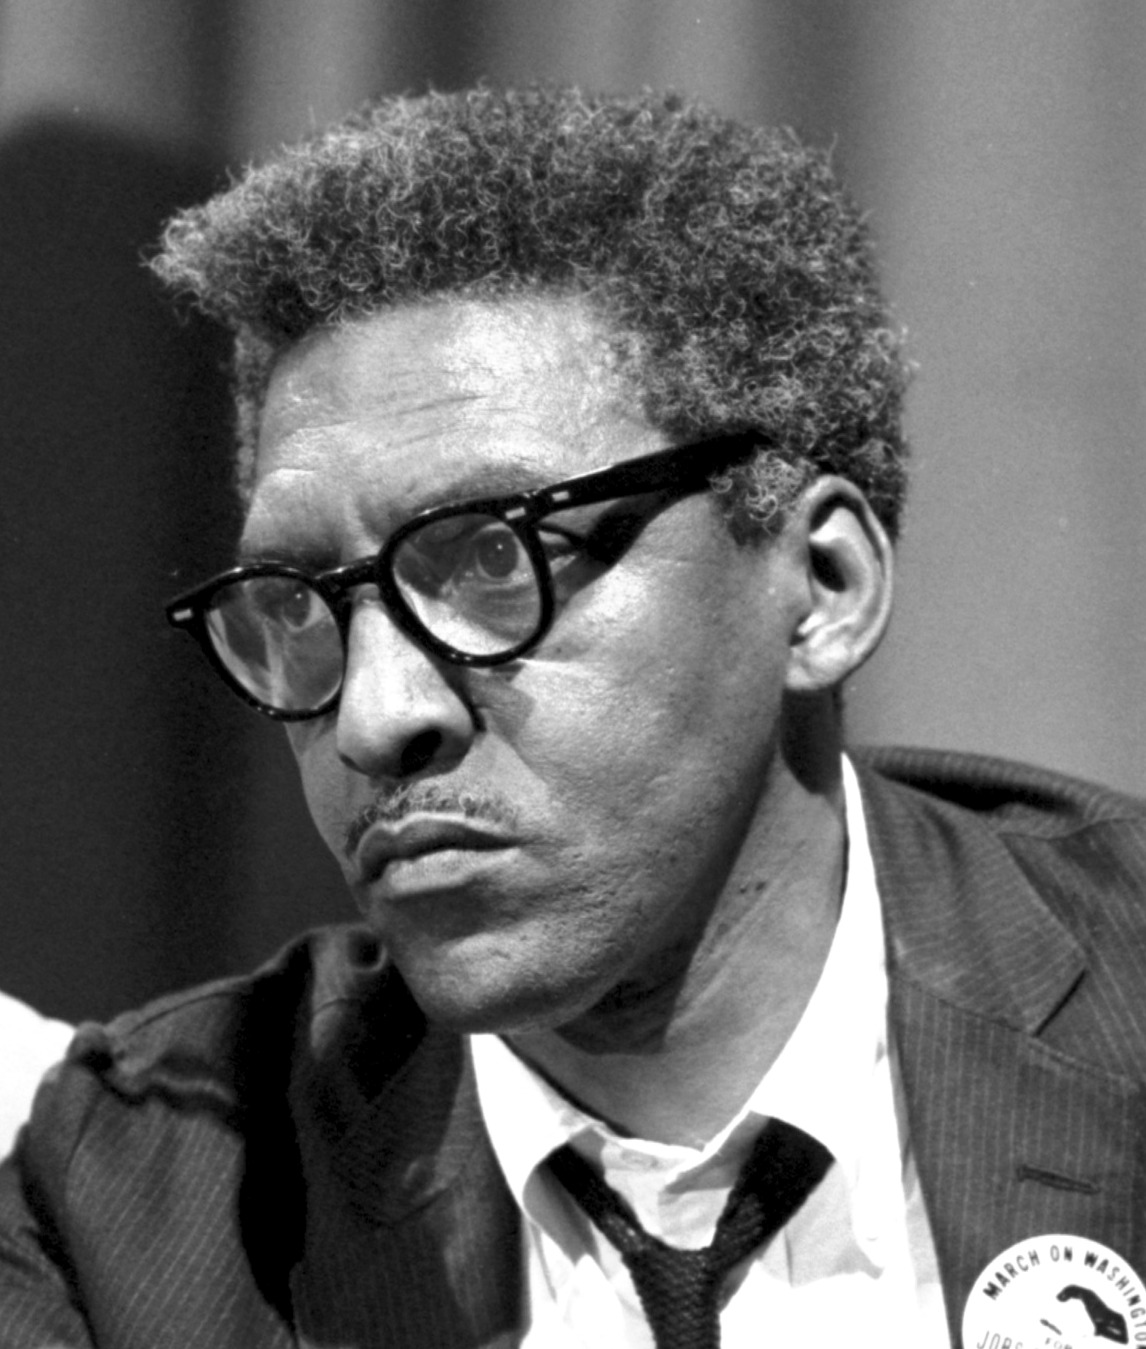 Bayard Rustin. American leader in social movements for nonviolence, gay rights, socialism and civil rights.